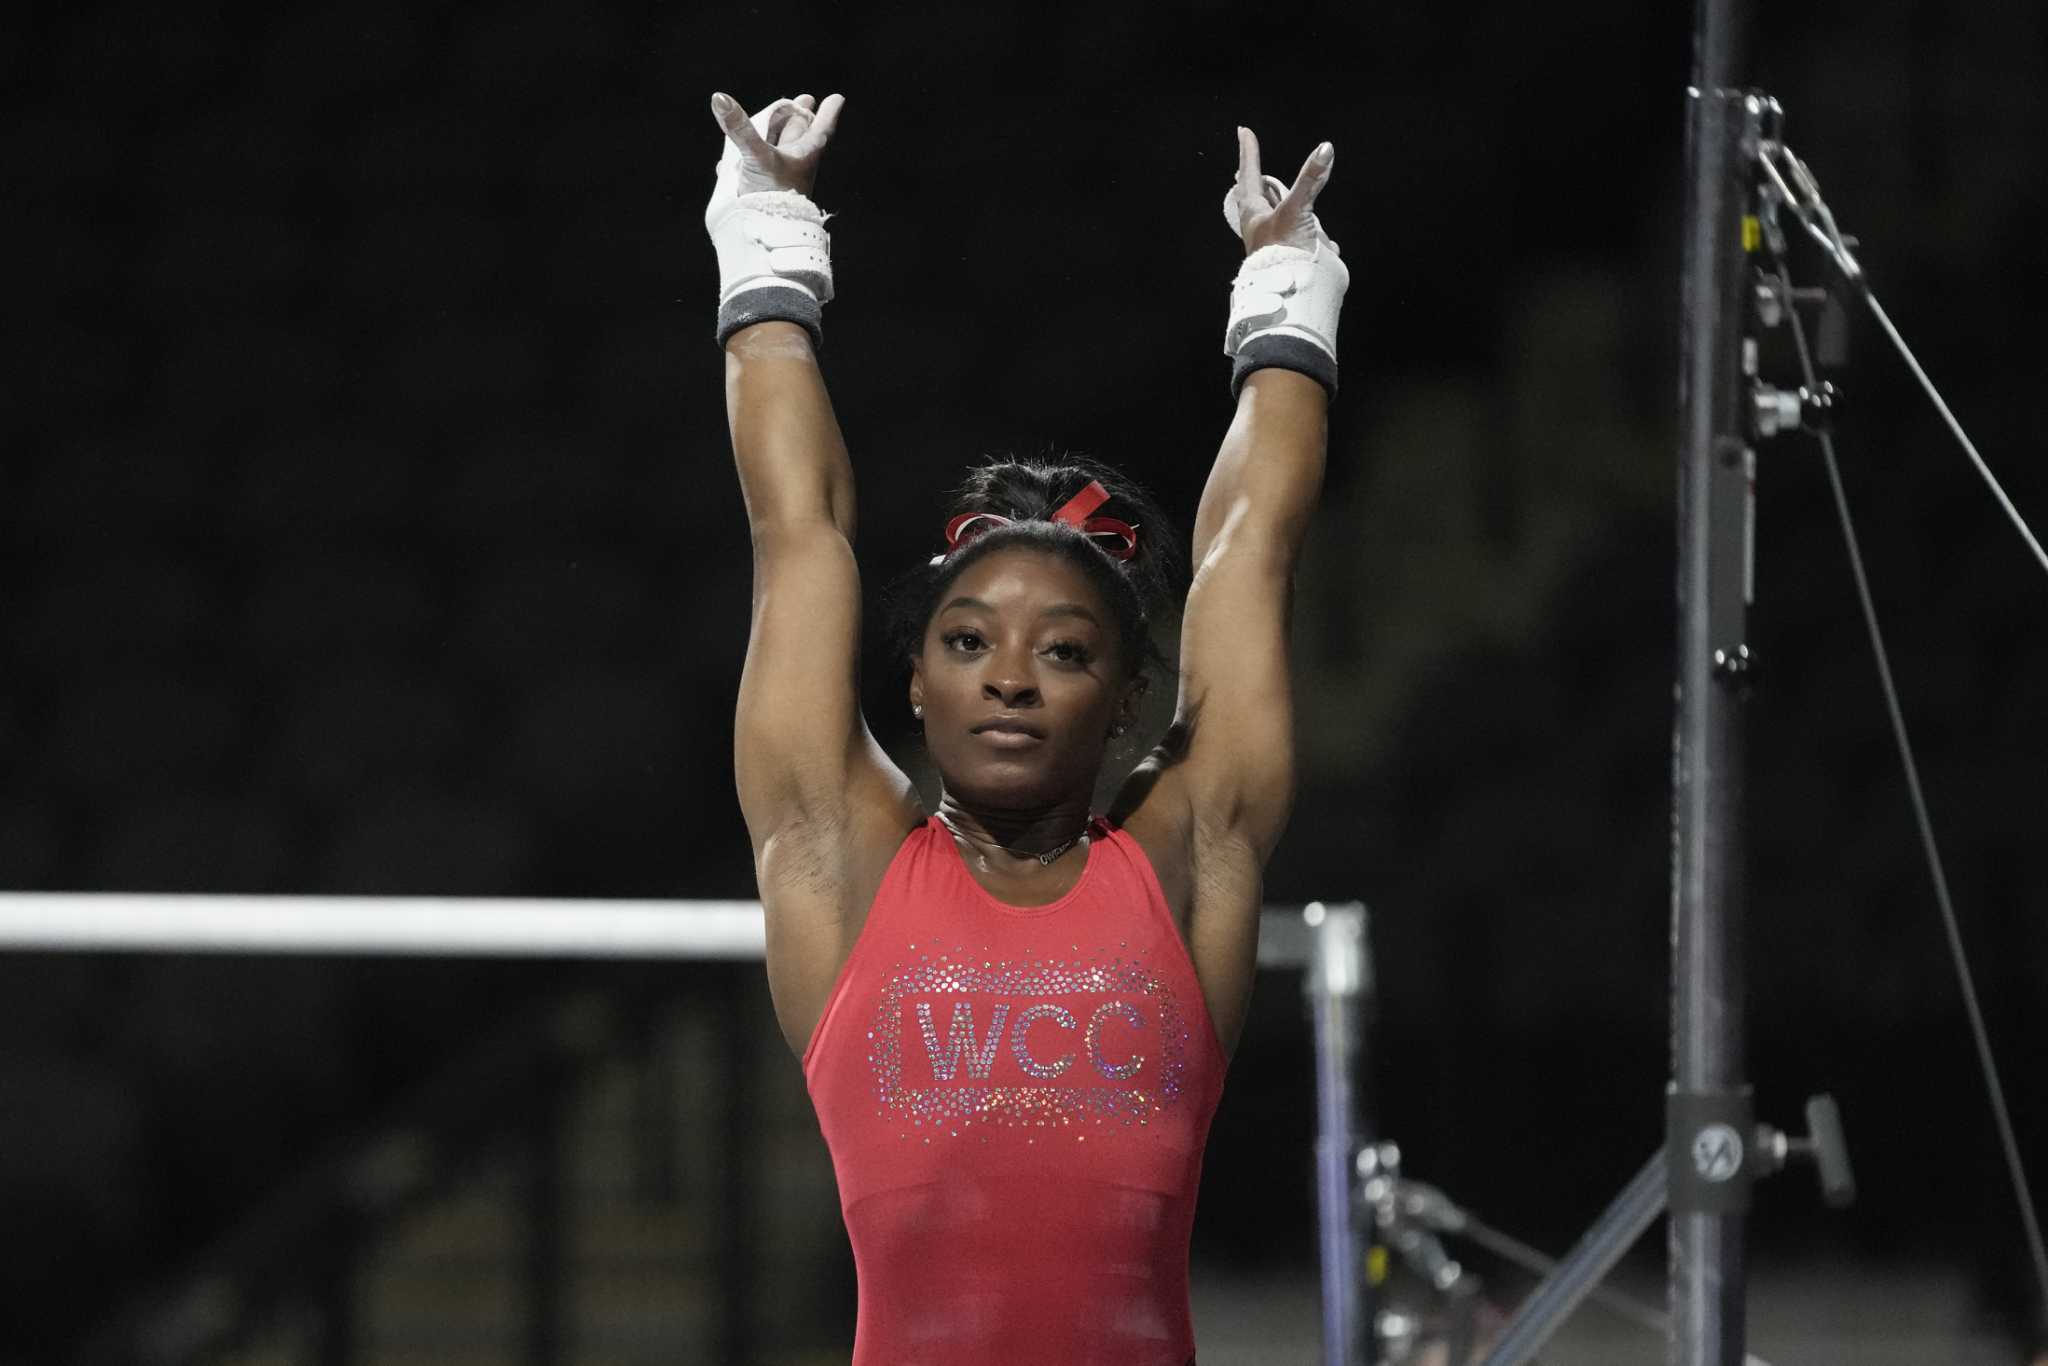 Simone Biles: A strong focus on return to gymnastics competition